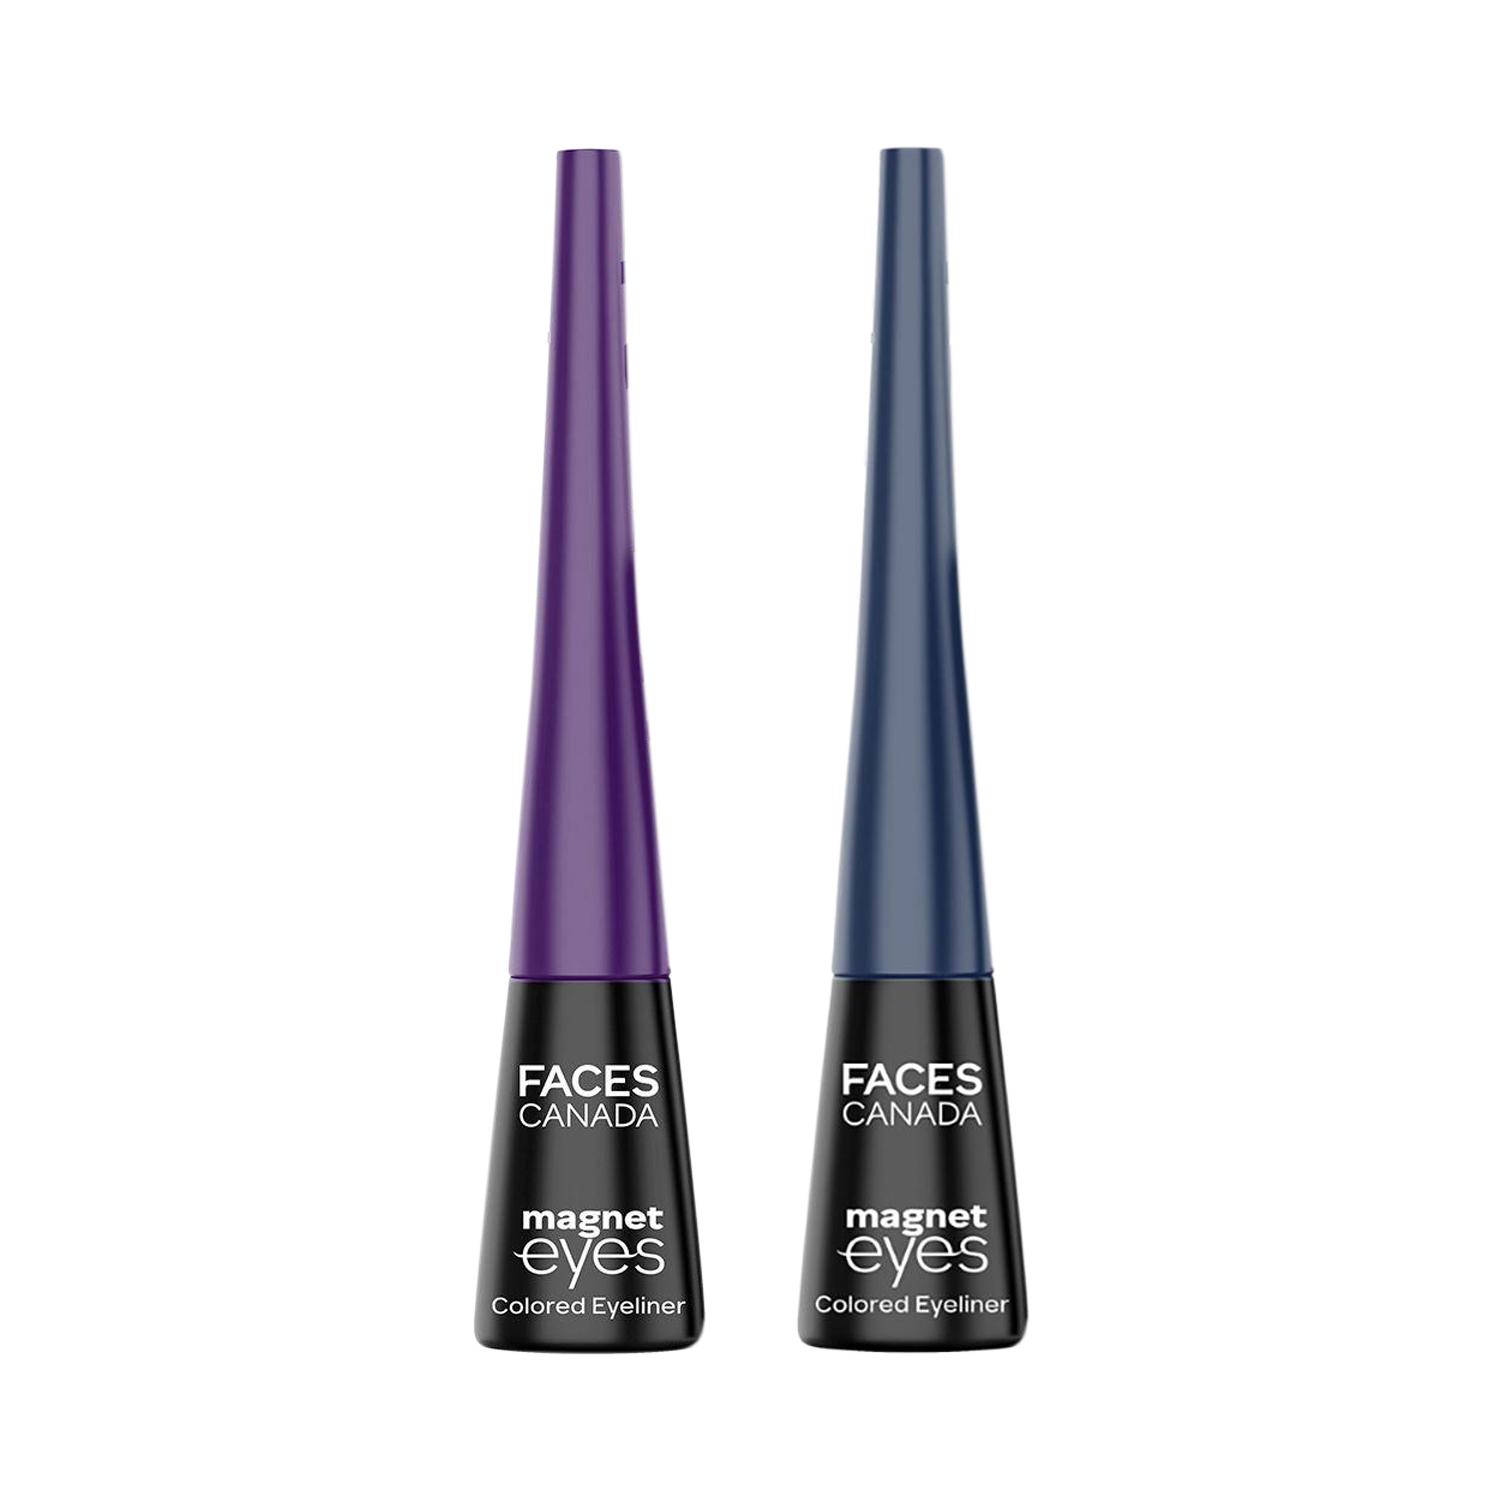 Faces Canada | Faces Canada Magneteyes Color Eyeliners Dramatic Purple and Dazzling Blue Combo (Pack of 2)